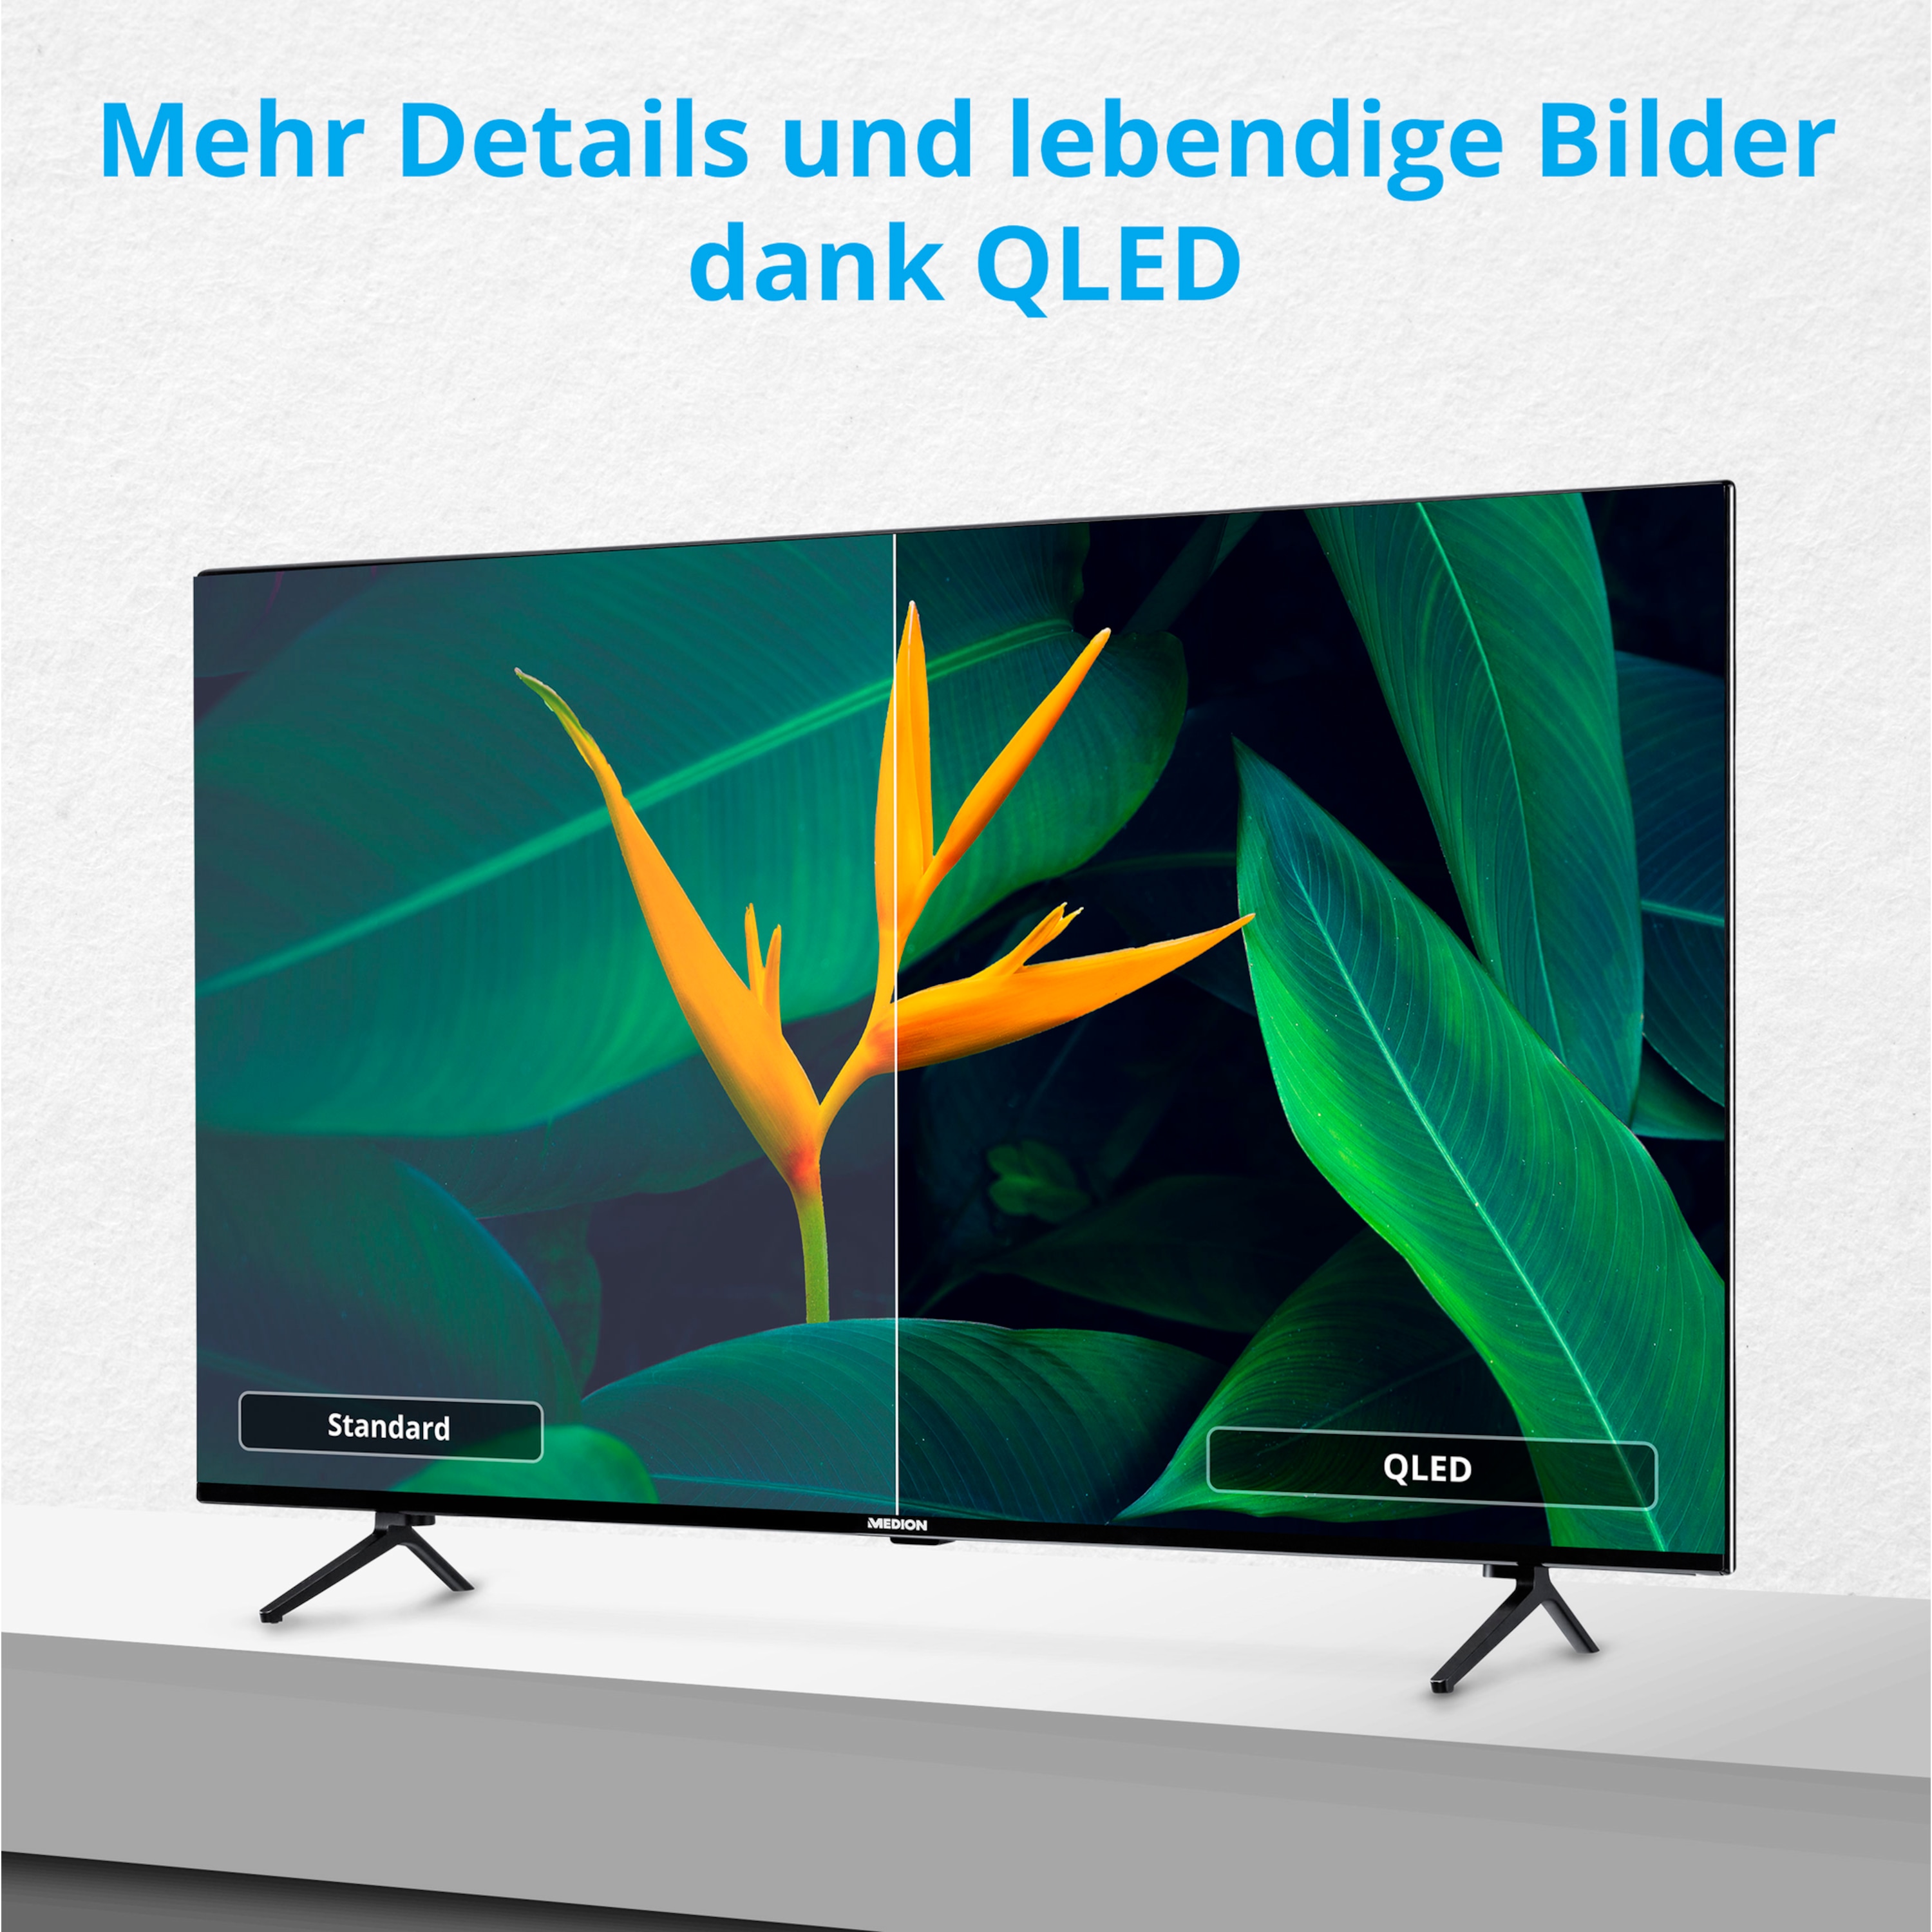 MEDION® LIFE® X16540 QLED Android TV, 163,9 cm (65'') Ultra HD Smart-TV, HDR, Dolby Vision®, Micro Dimming, PVR ready, Netflix, Amazon Prime Video, Bluetooth®, DTS Sound, HD Triple Tuner, CI+